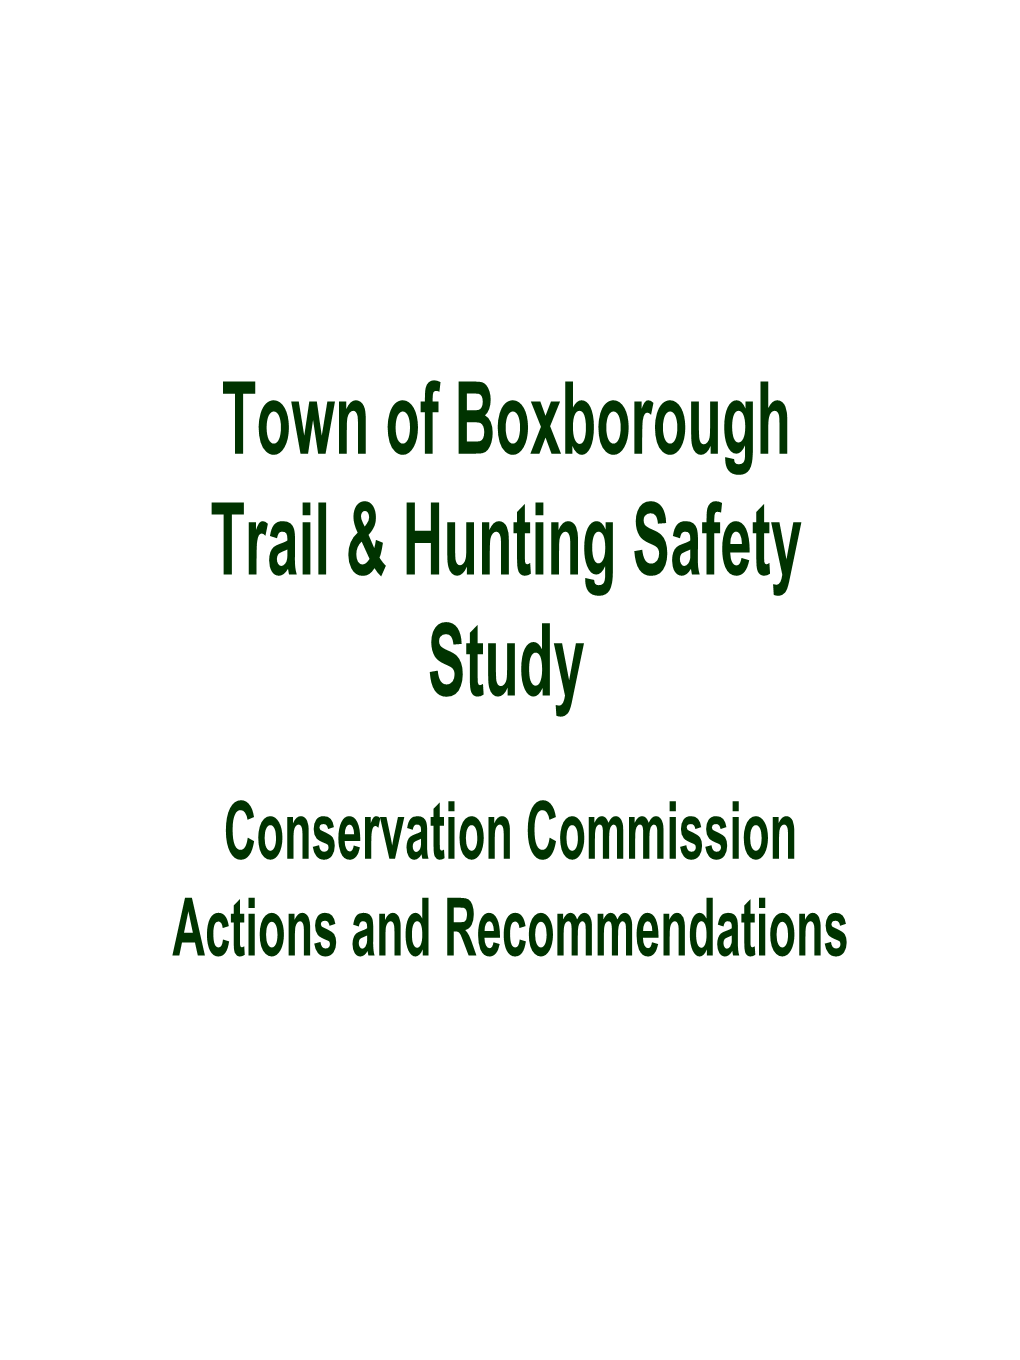 Town of Boxborough Trail & Hunting Safety Study